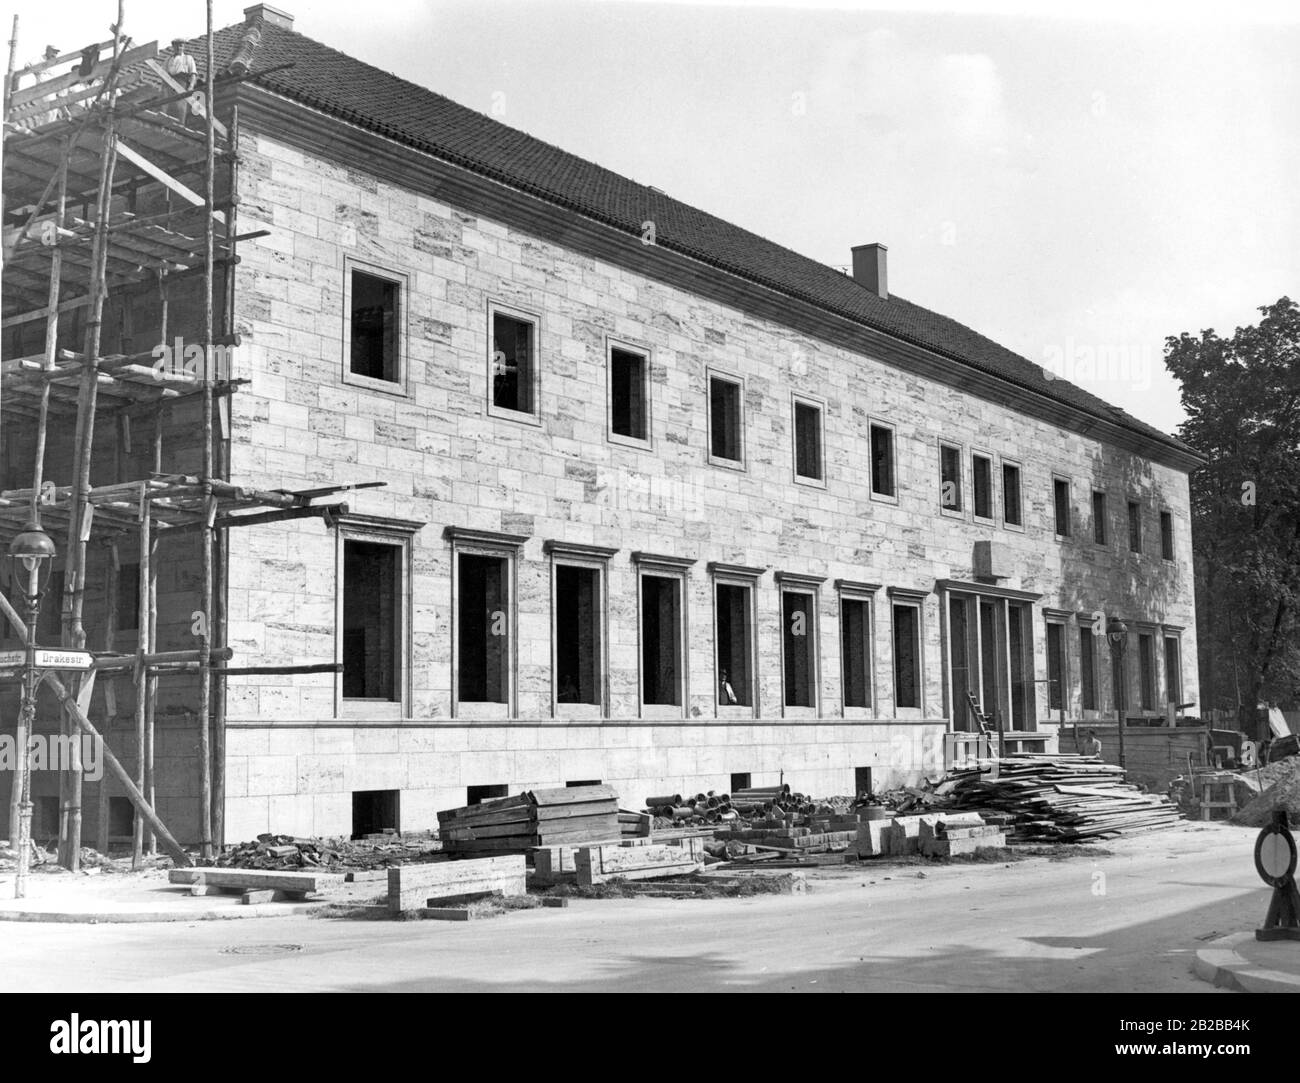 Construction of the Yugoslav Embassy in the Rauchstrasse in Berlin. The villa of the emigrated Mendelssohn-Bartholdy family was demolished for this construction. Stock Photo